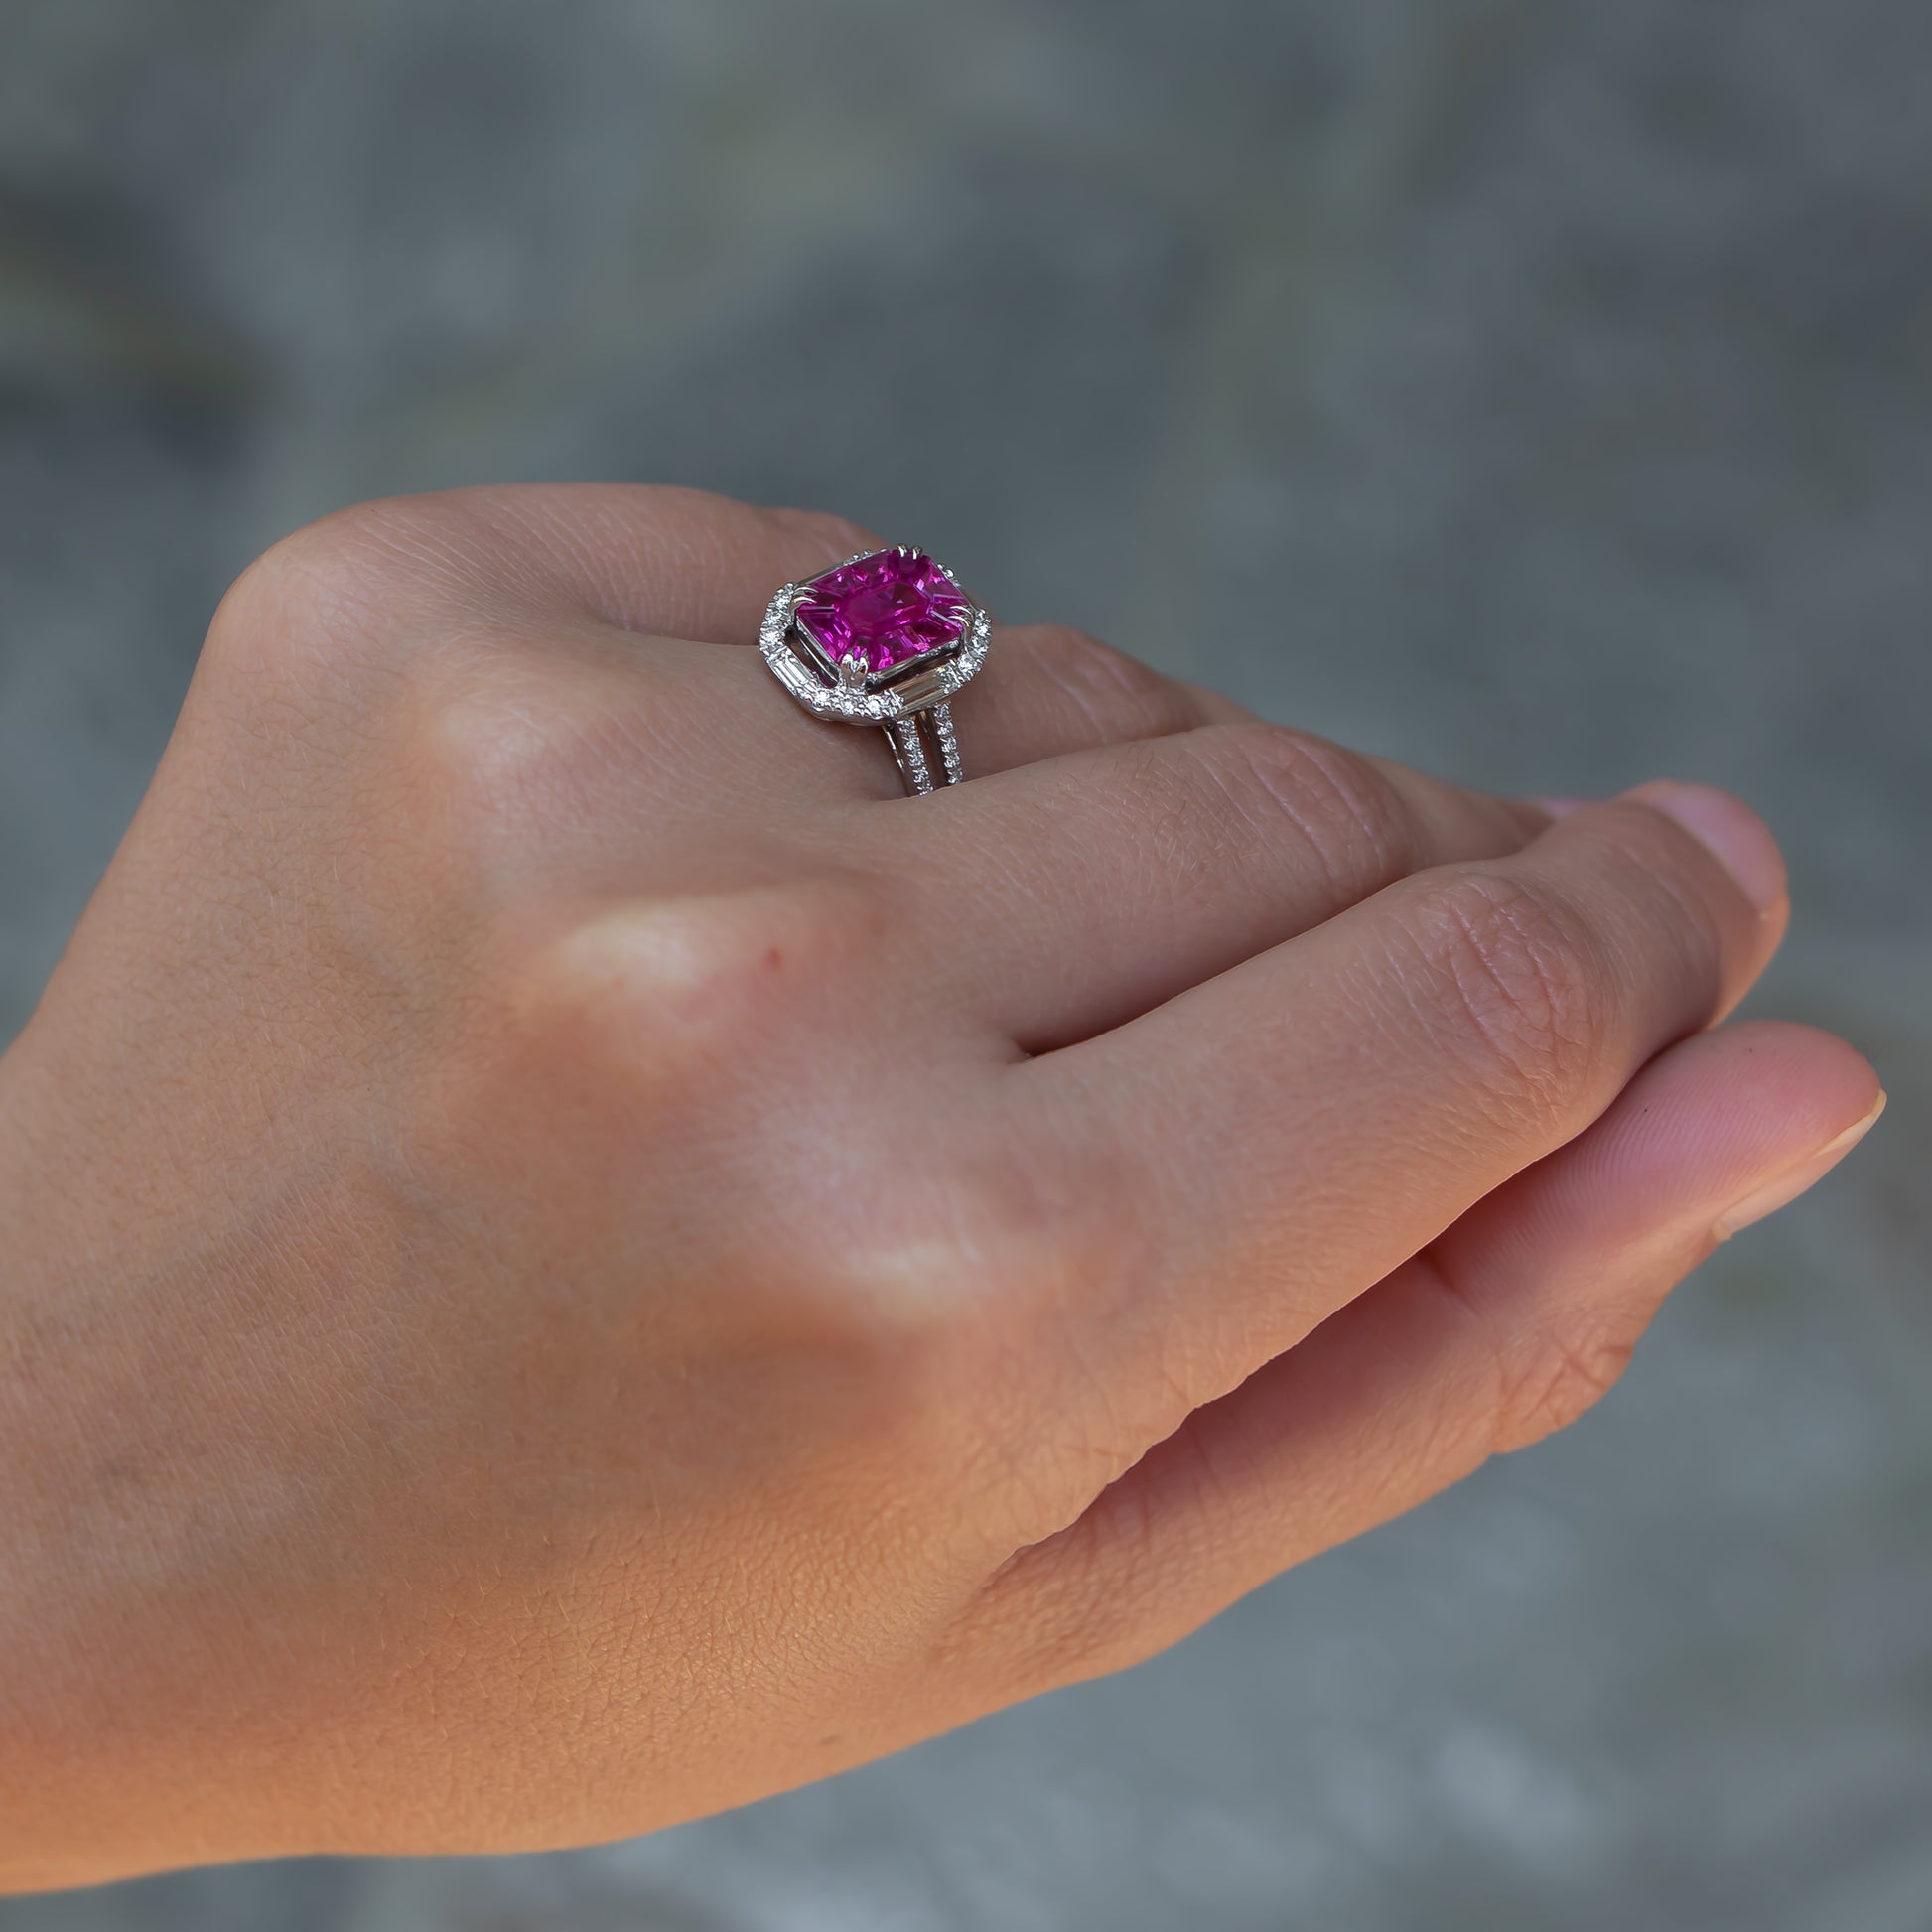 Hot Pink Sapphires 1.85 Carats Ring With Diamonds 0.98 Carats from Lux USA on hand photo